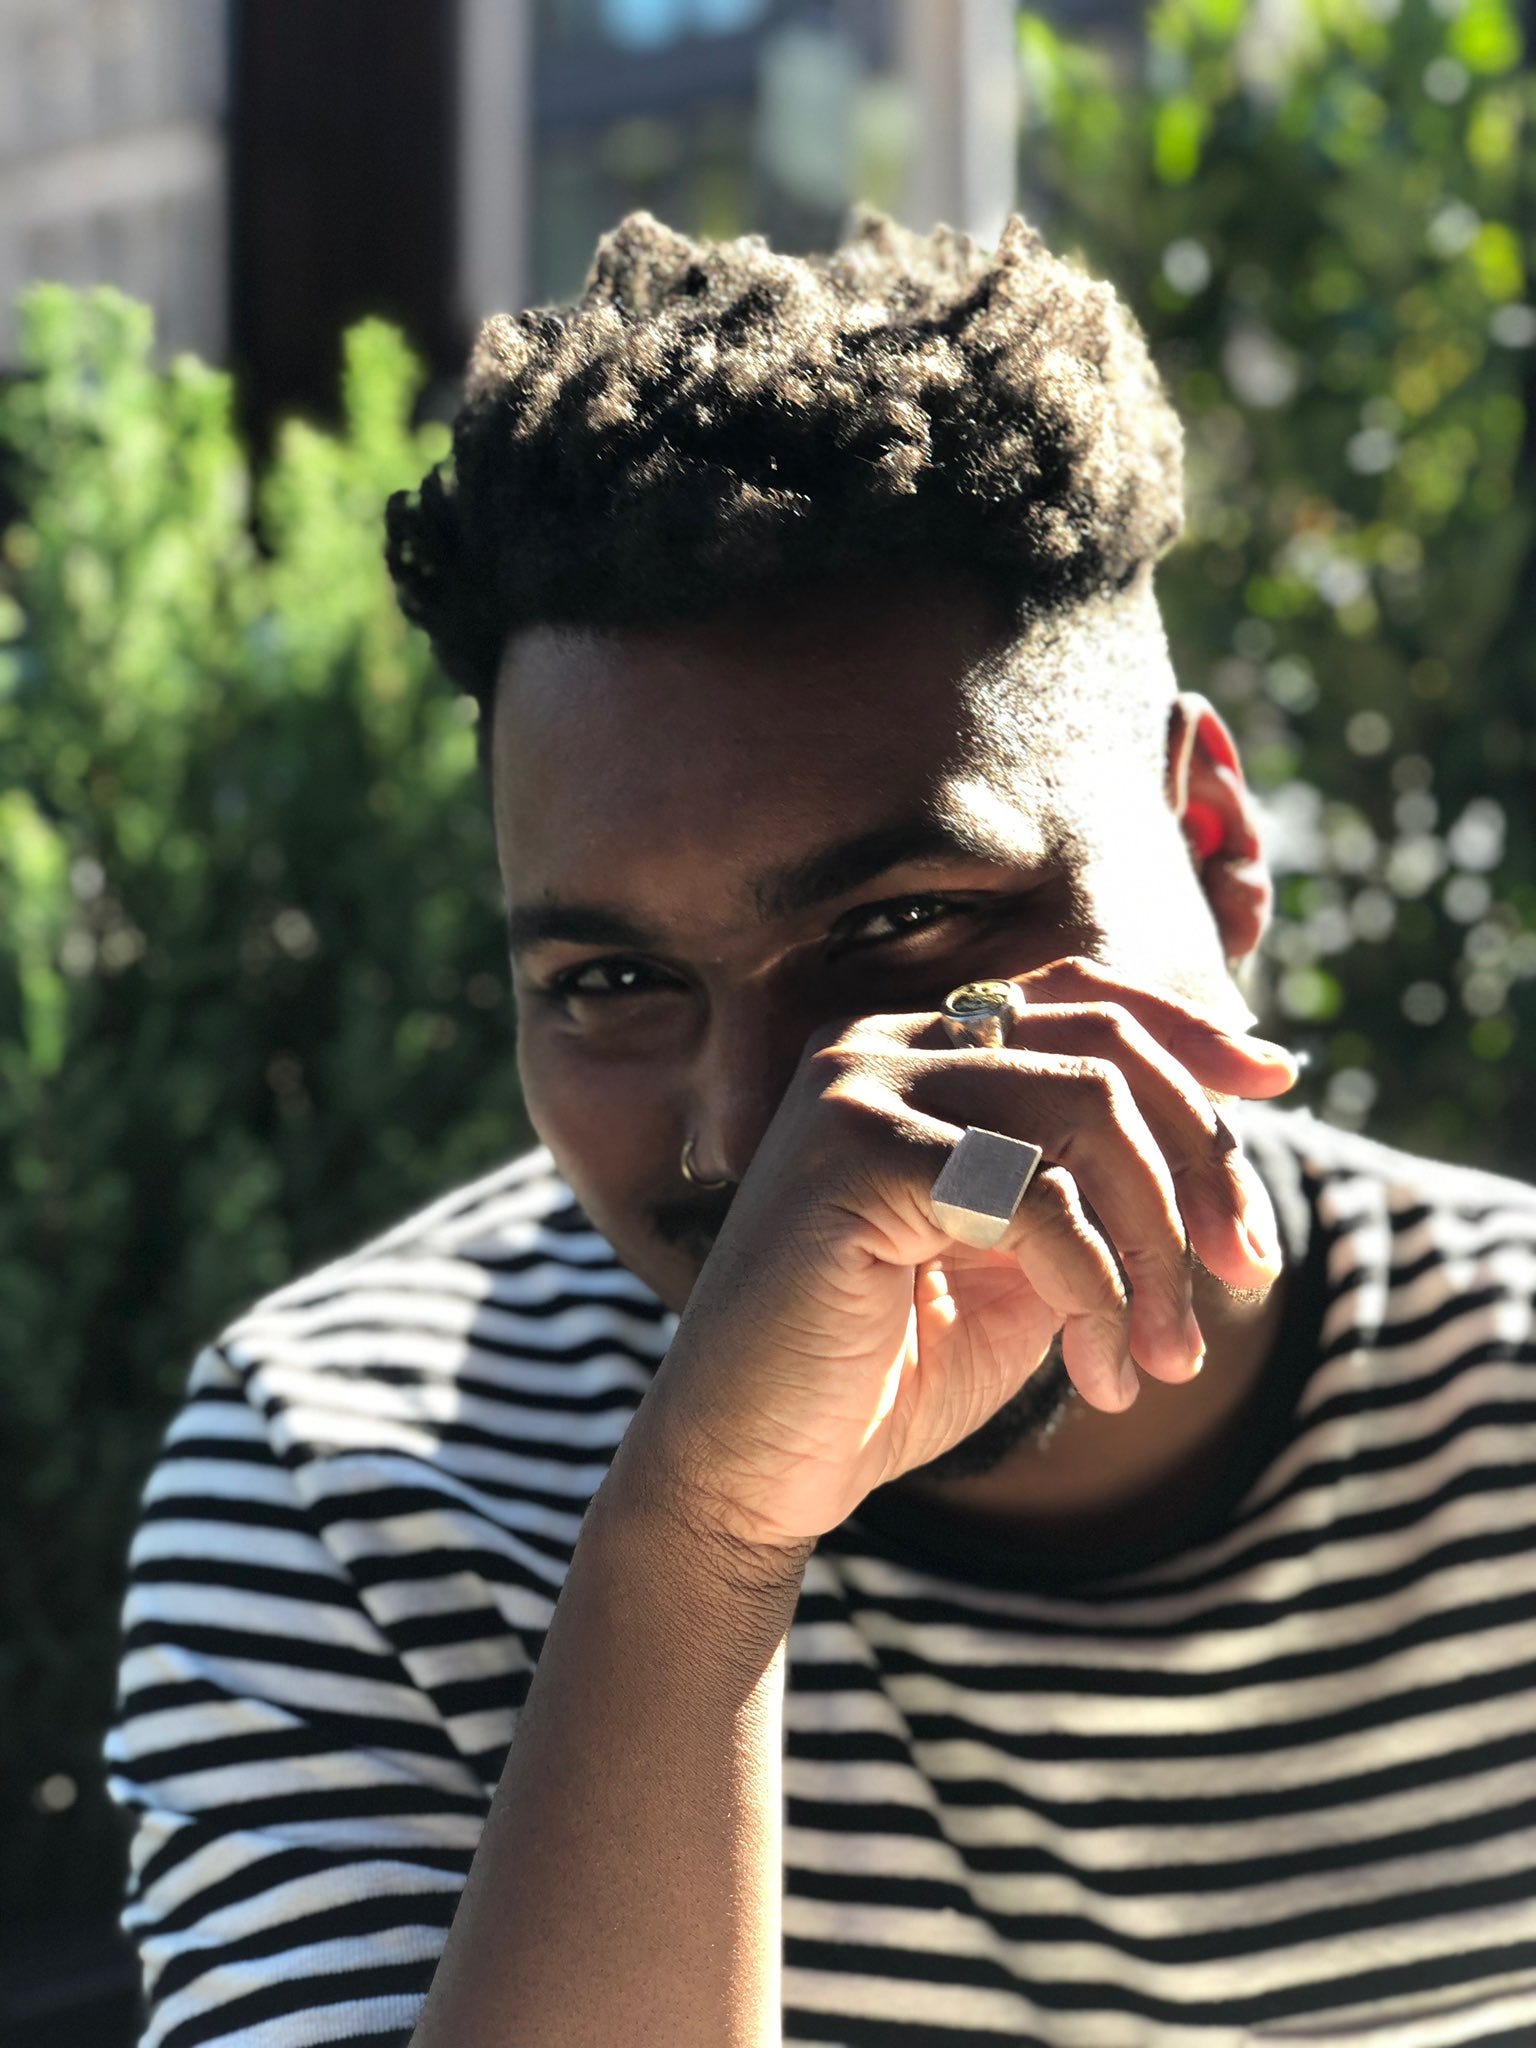 Saeed Jones, likely photographed in 'portrait' mode to the dismay of professional photographer and occasional Alive contributor Maddie McGarvey